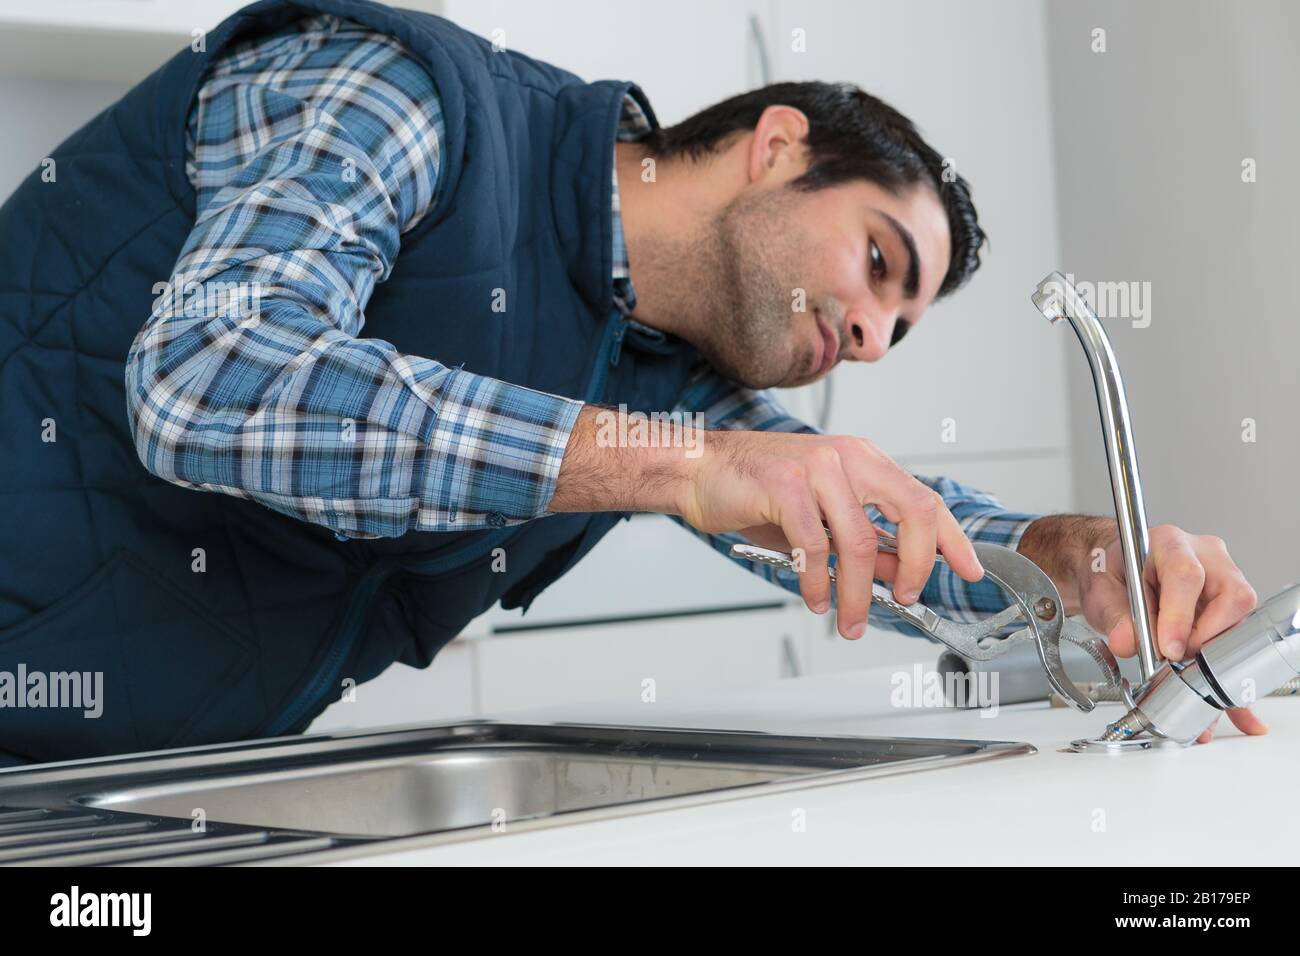 removing corroded kitchen sink faucet